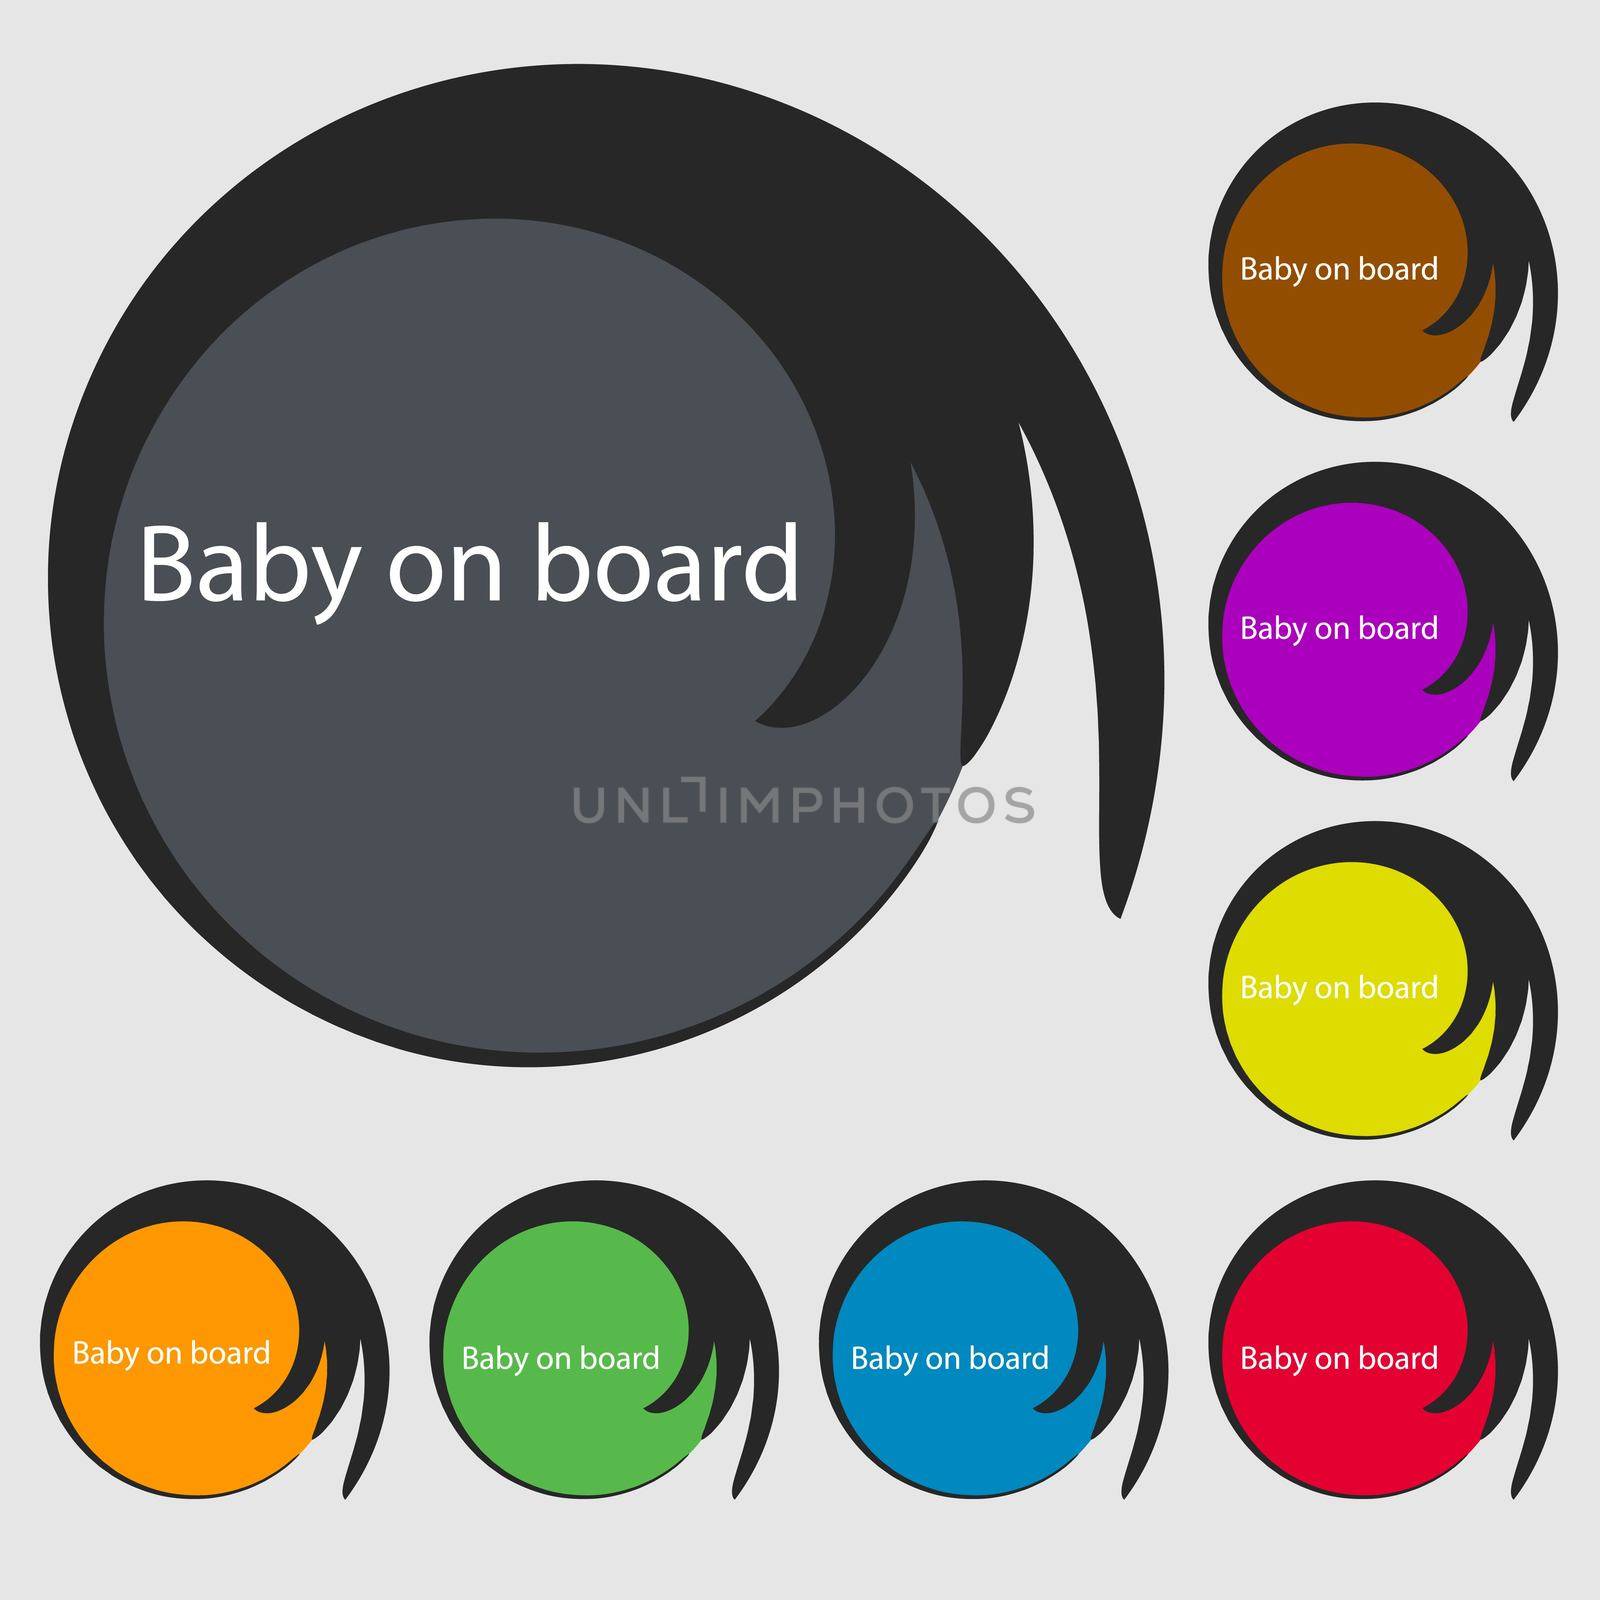 Baby on board sign icon. Infant in car caution symbol. Symbols on eight colored buttons. illustration